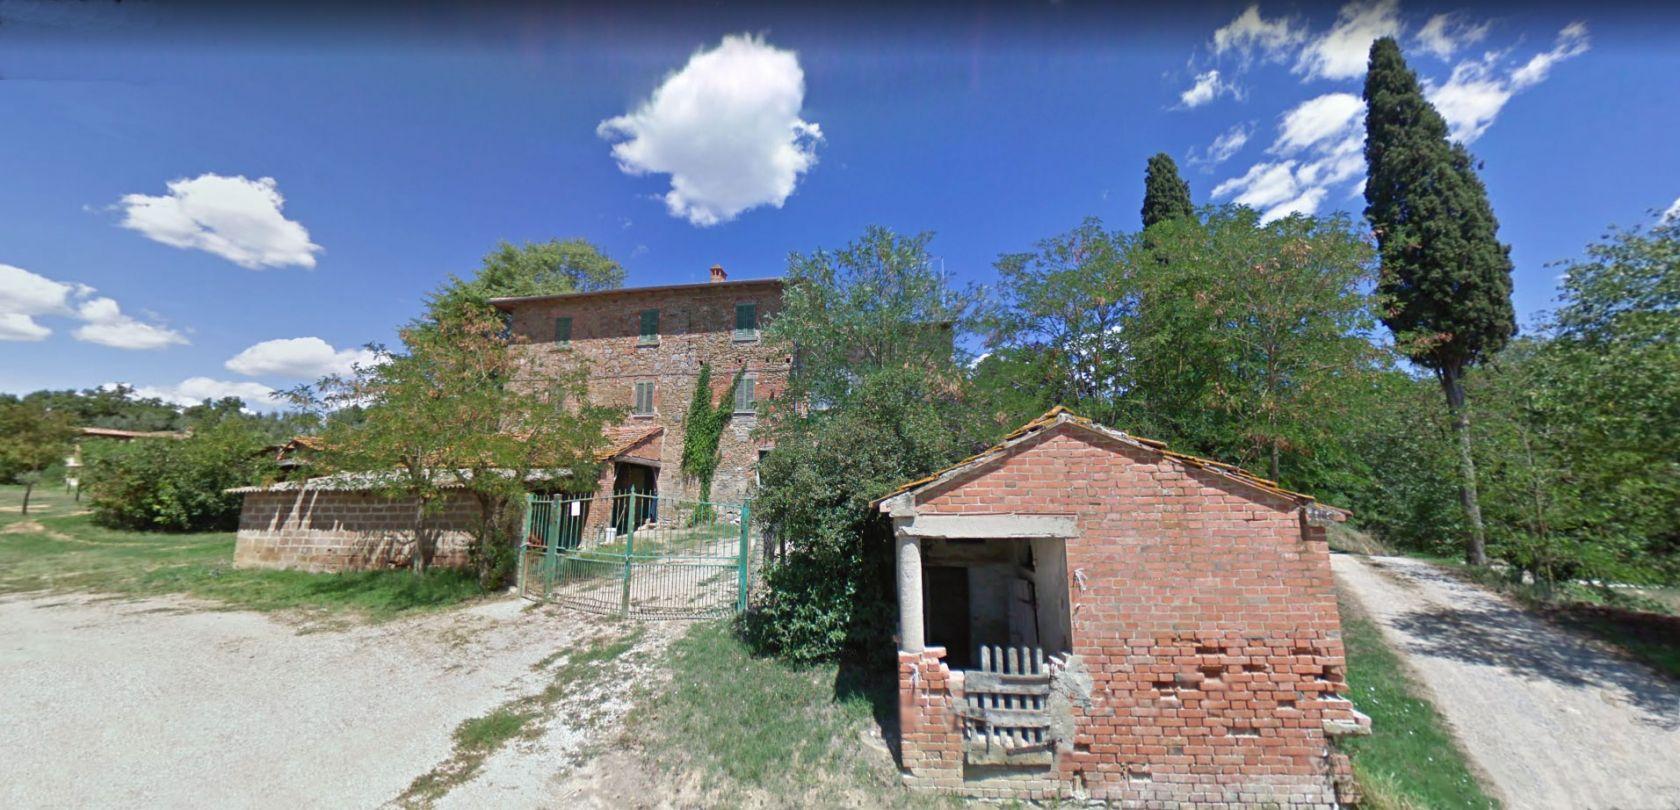 Toscana Immobiliare - Property for sale in Tuscany